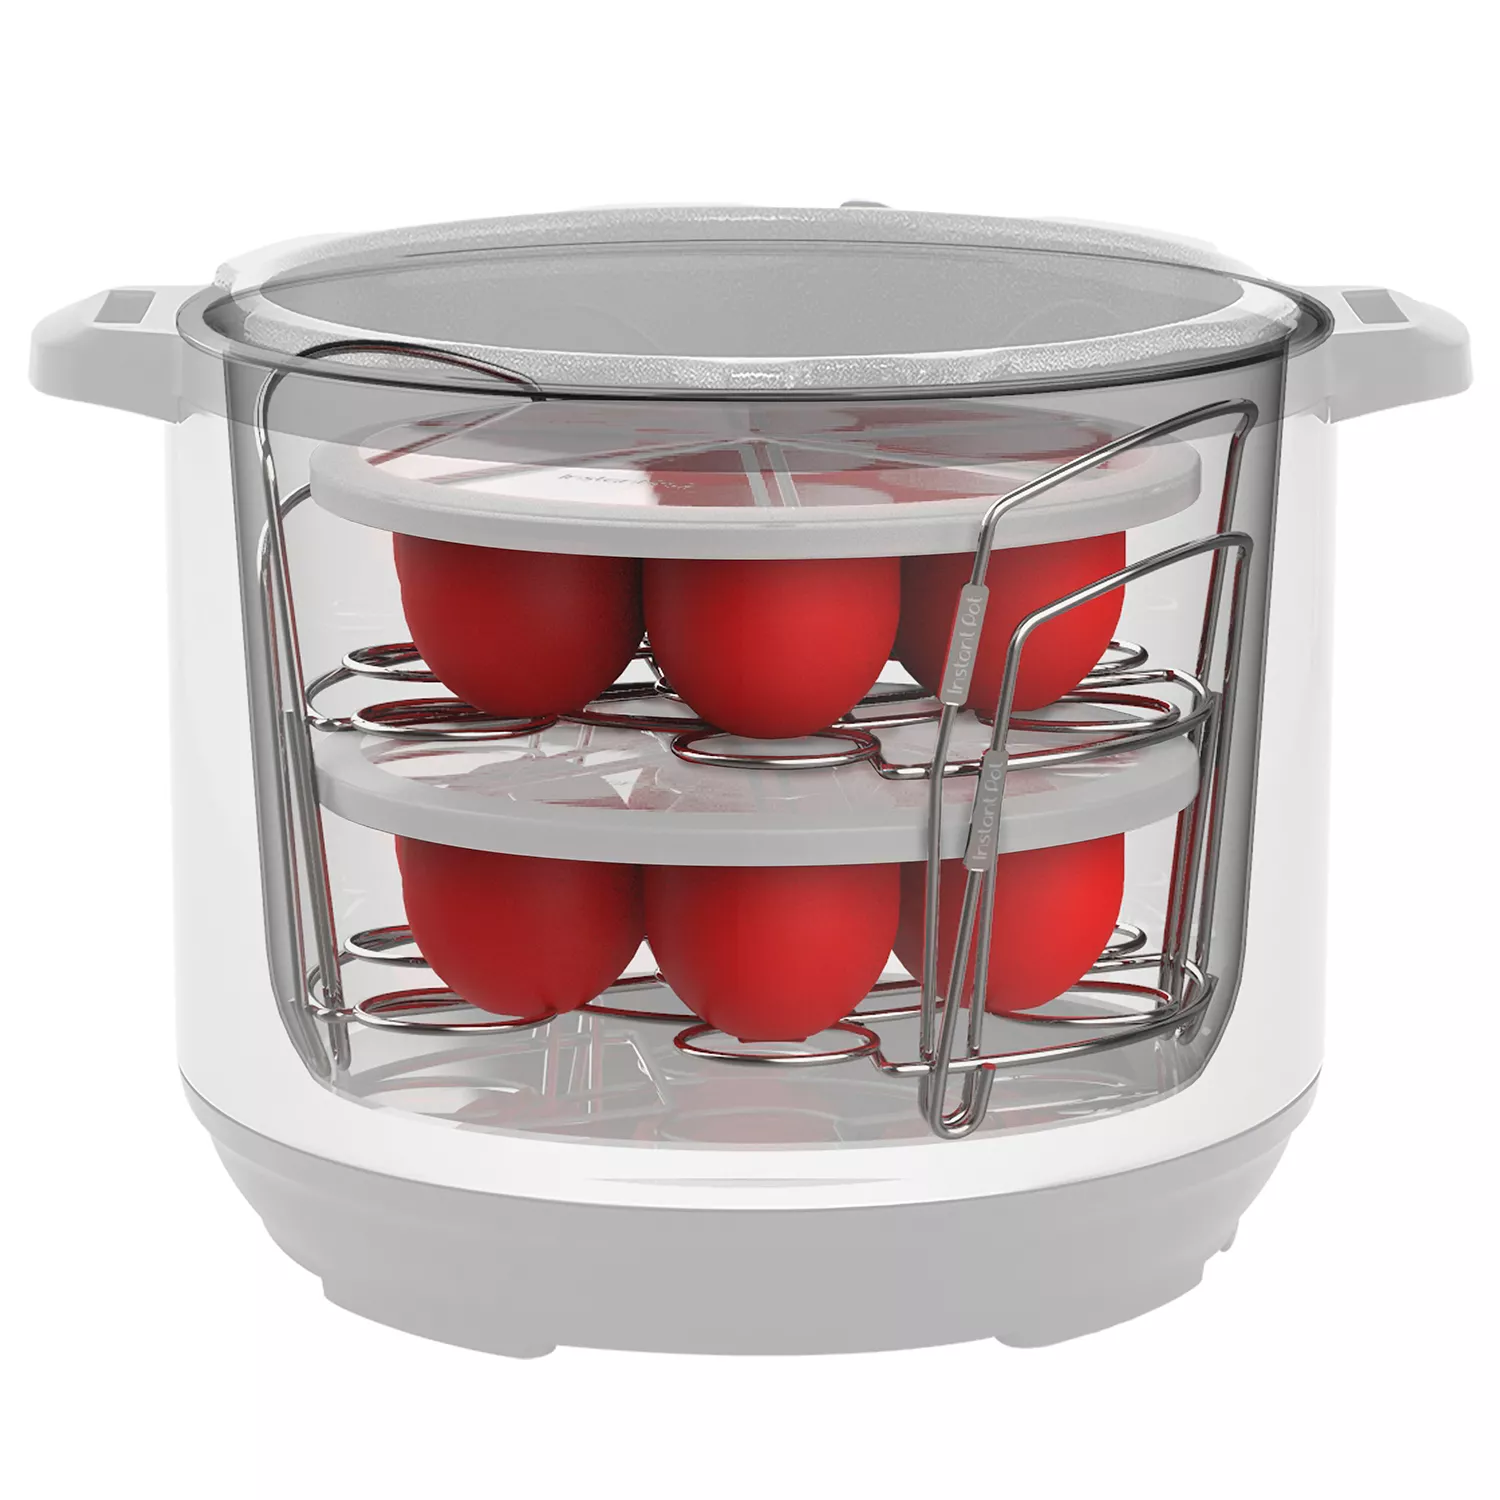 Instant Pot Egg Bites with Lid, Silicone